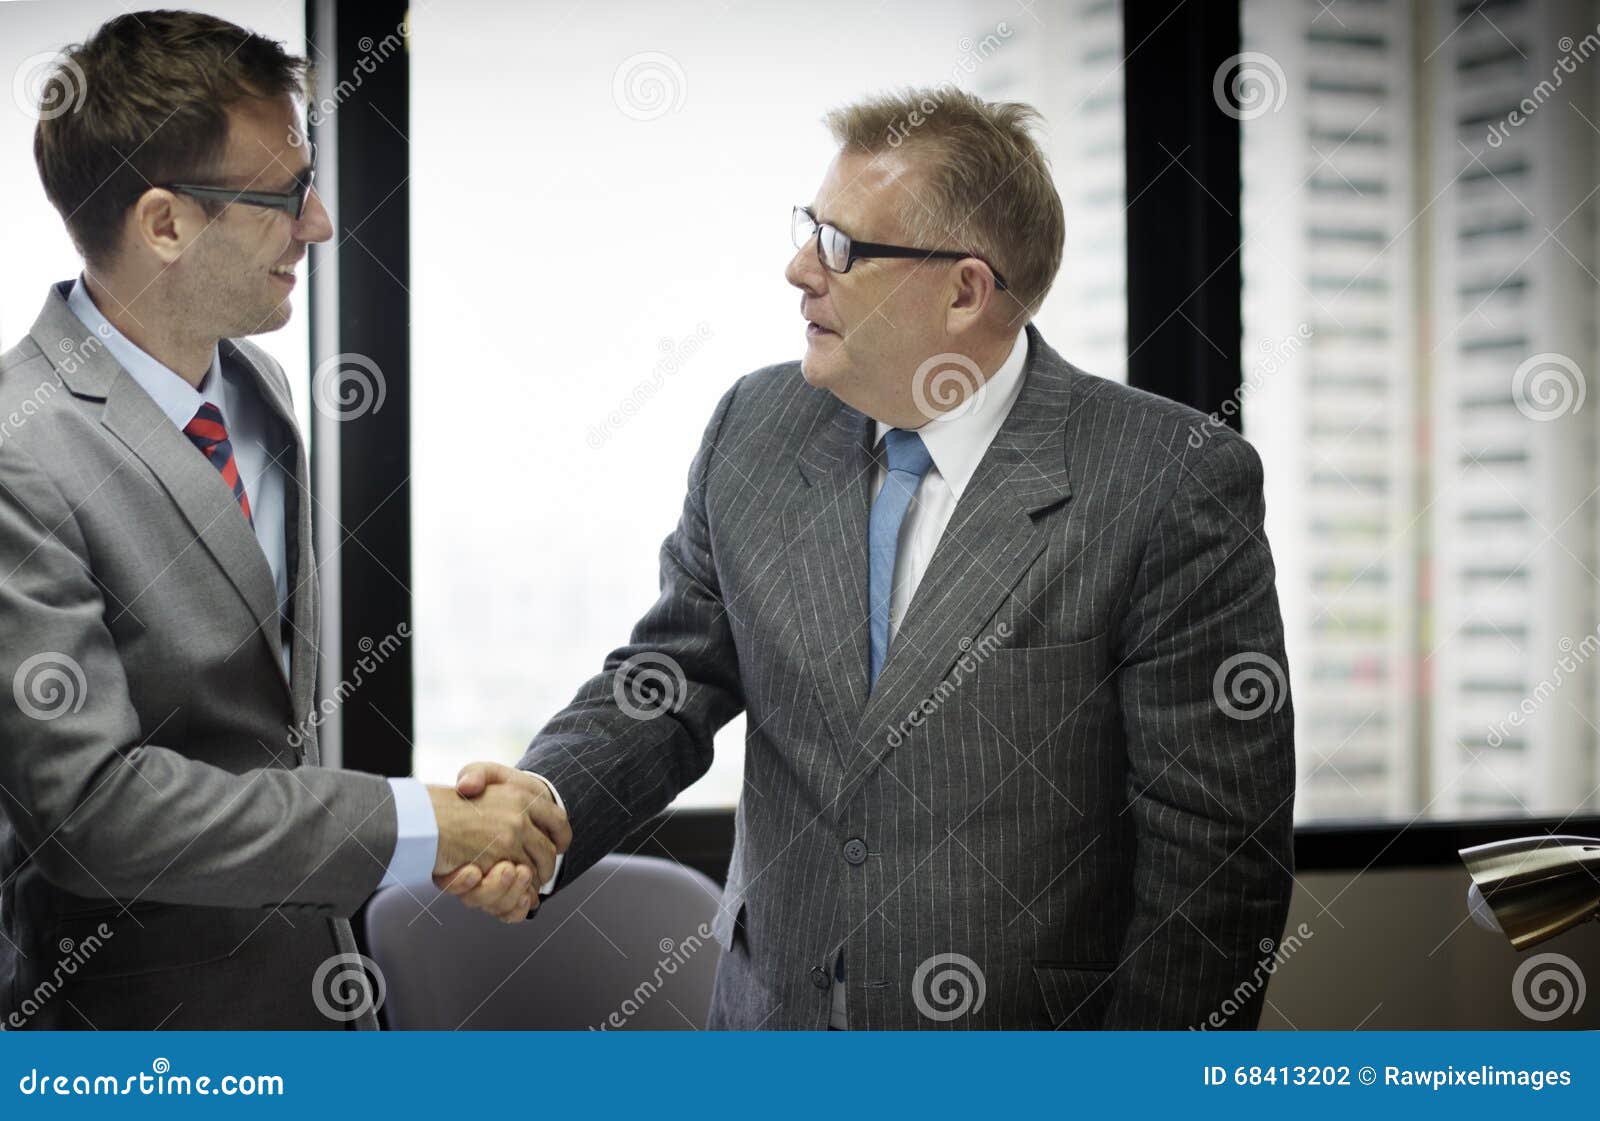 business people handshake greeting deal concept